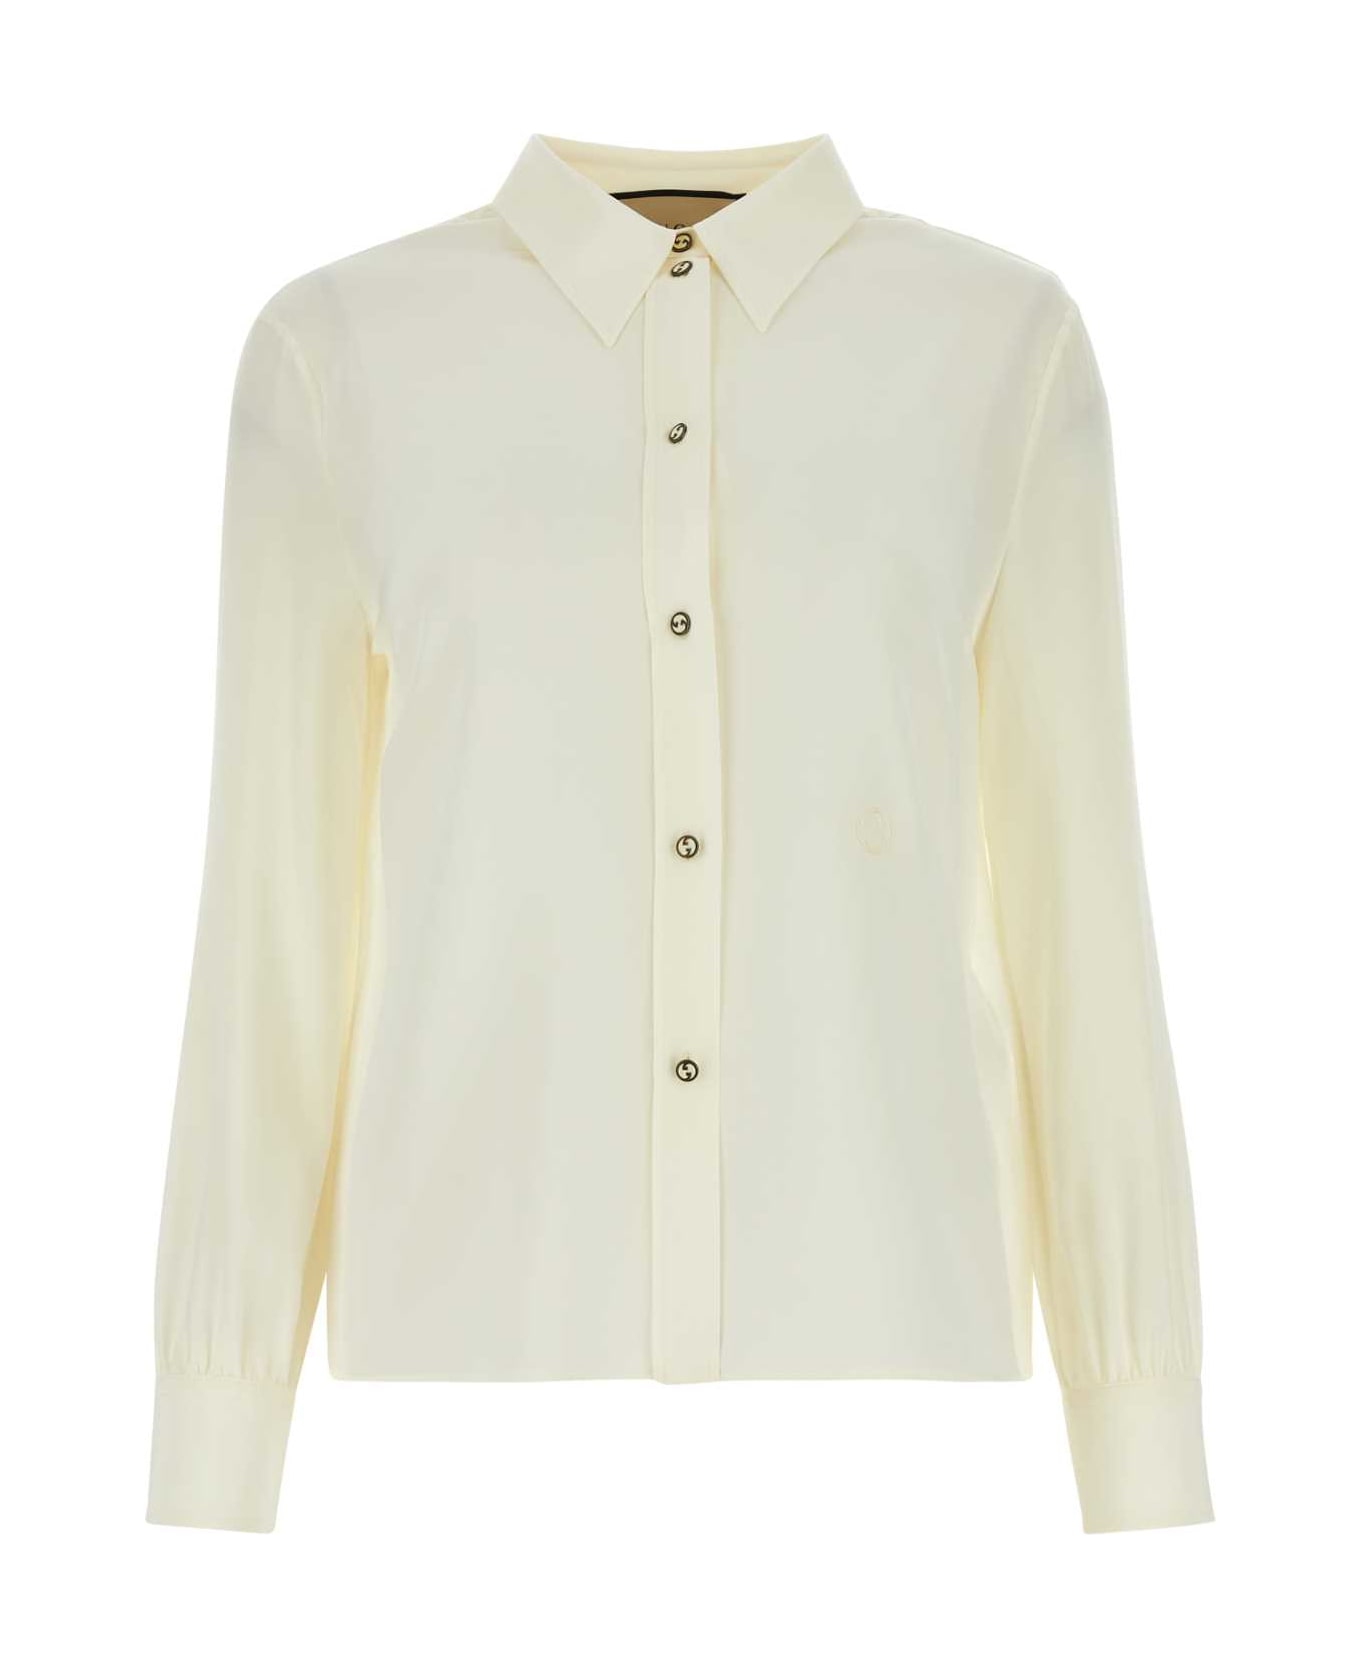 Gucci Ivory Crepe Shirt - IVOIRE シャツ